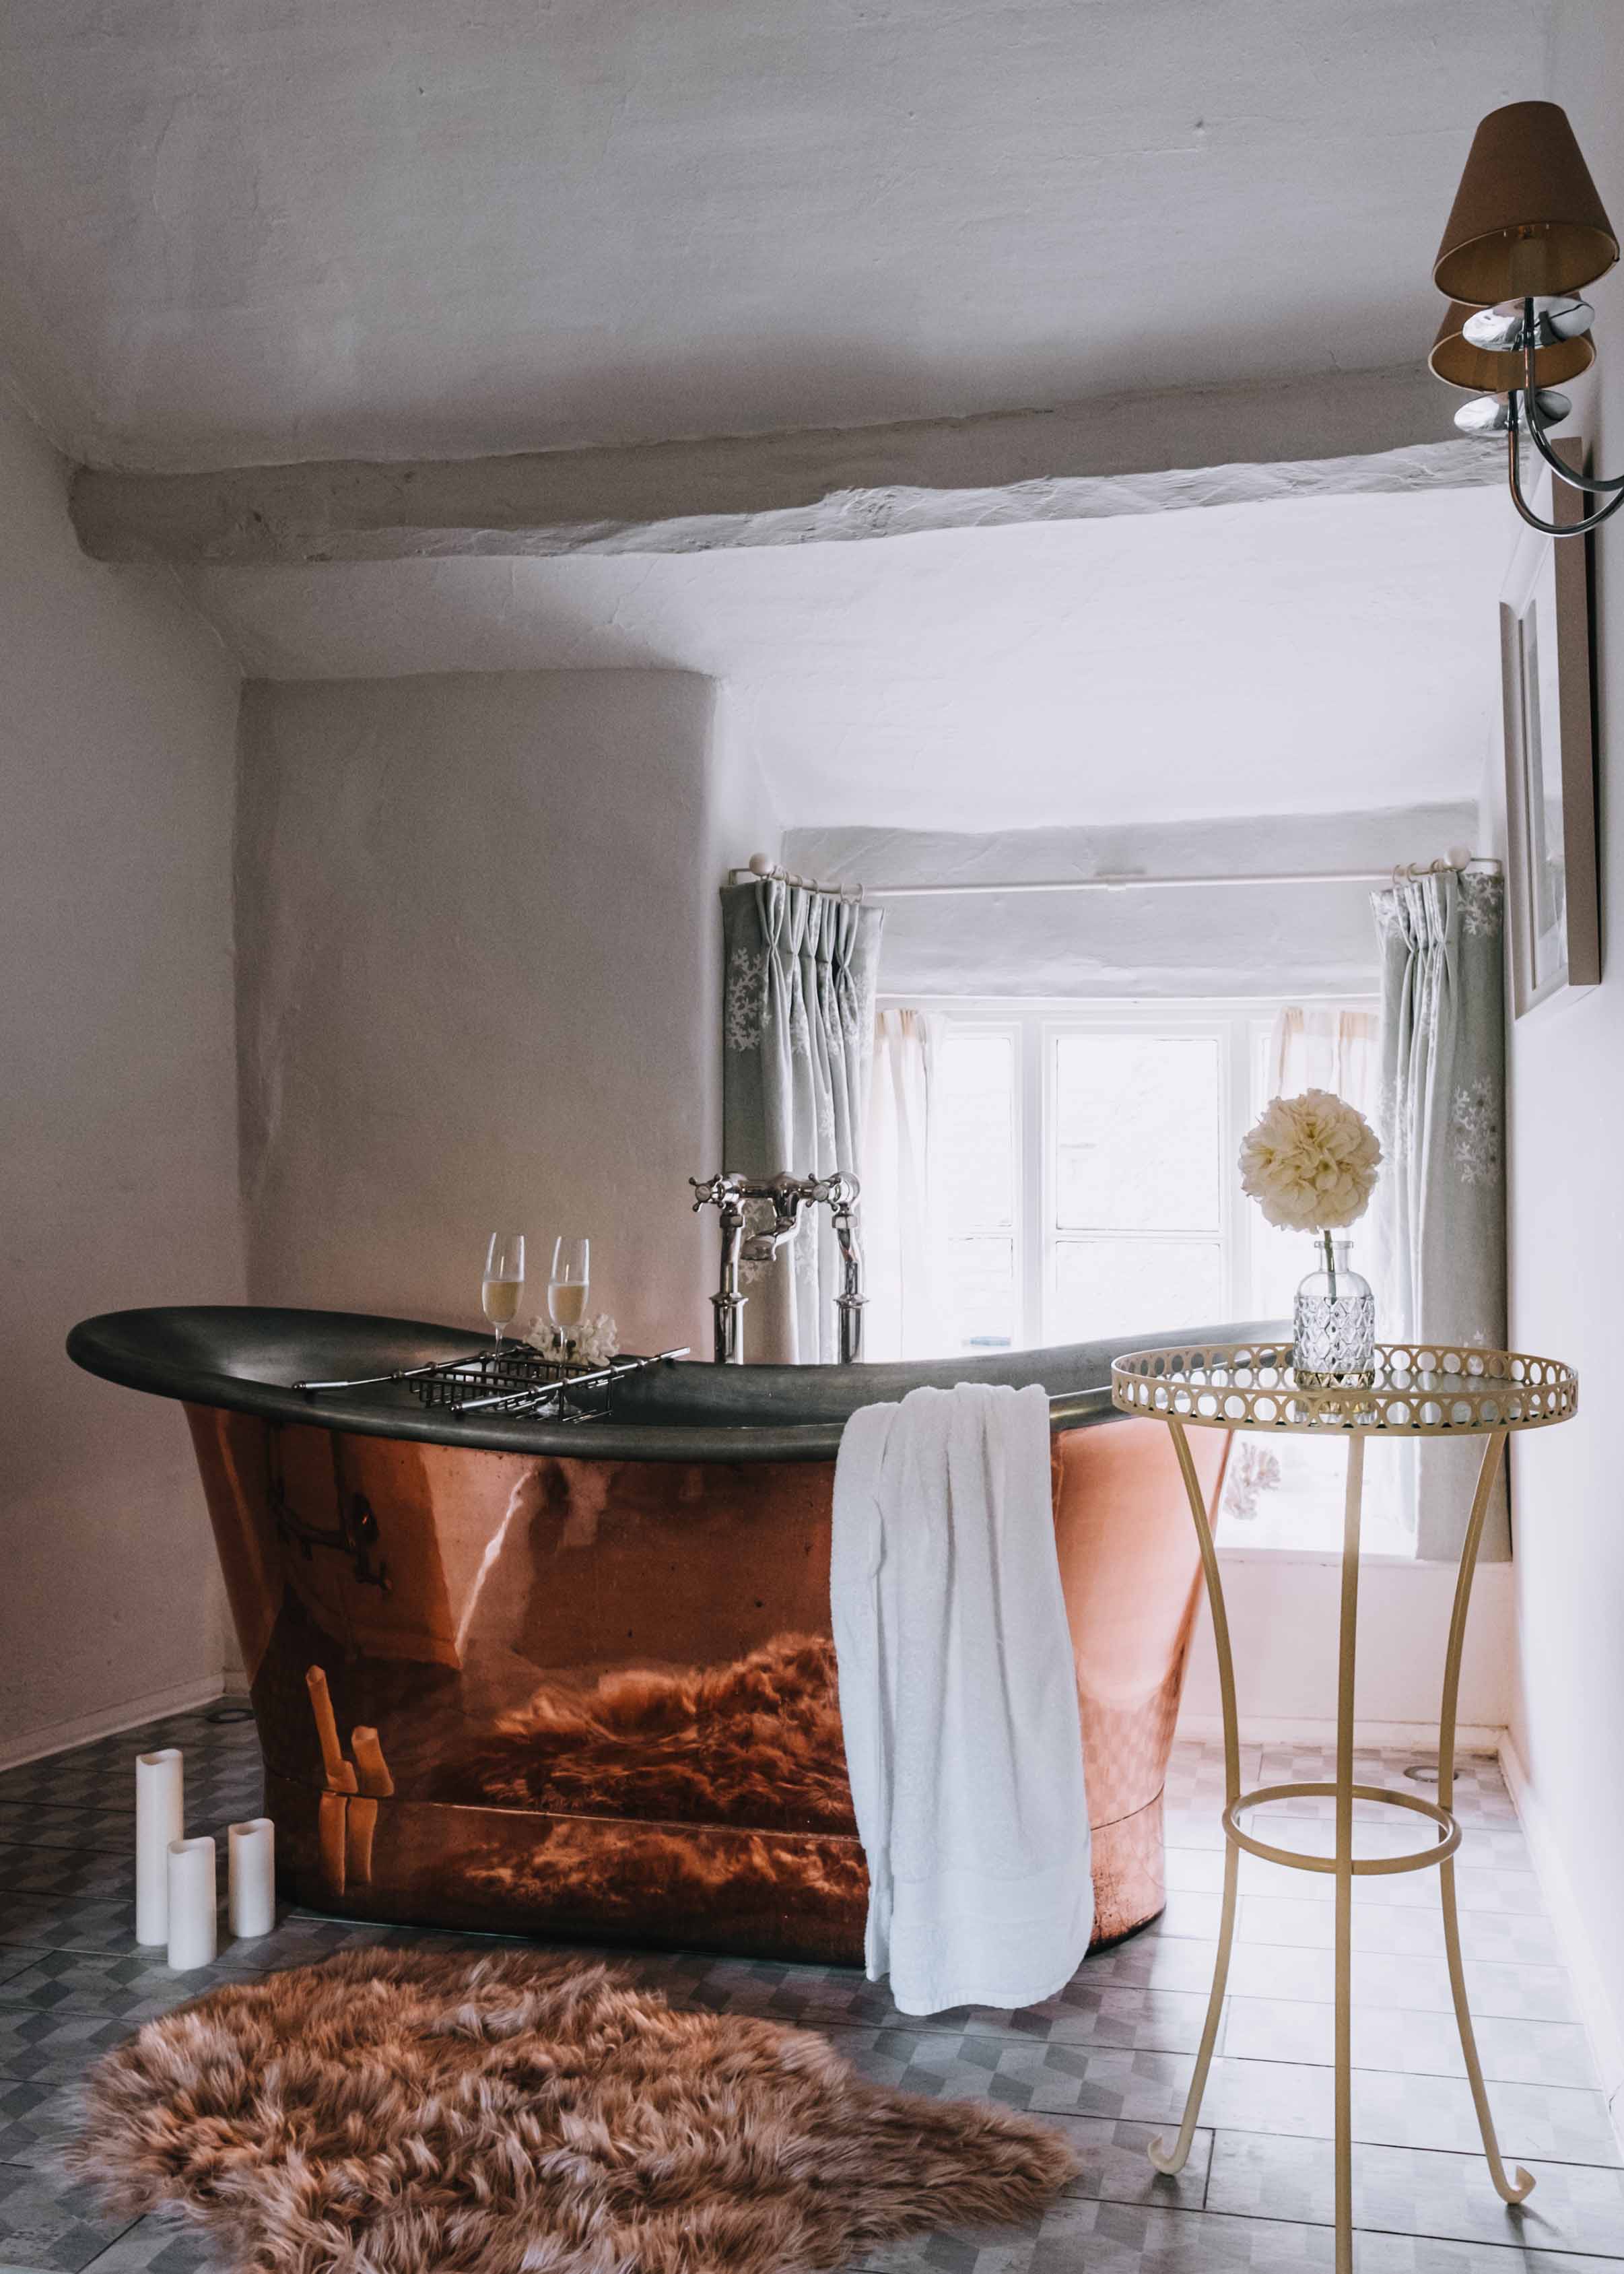 The copper bathtub at Sojourn